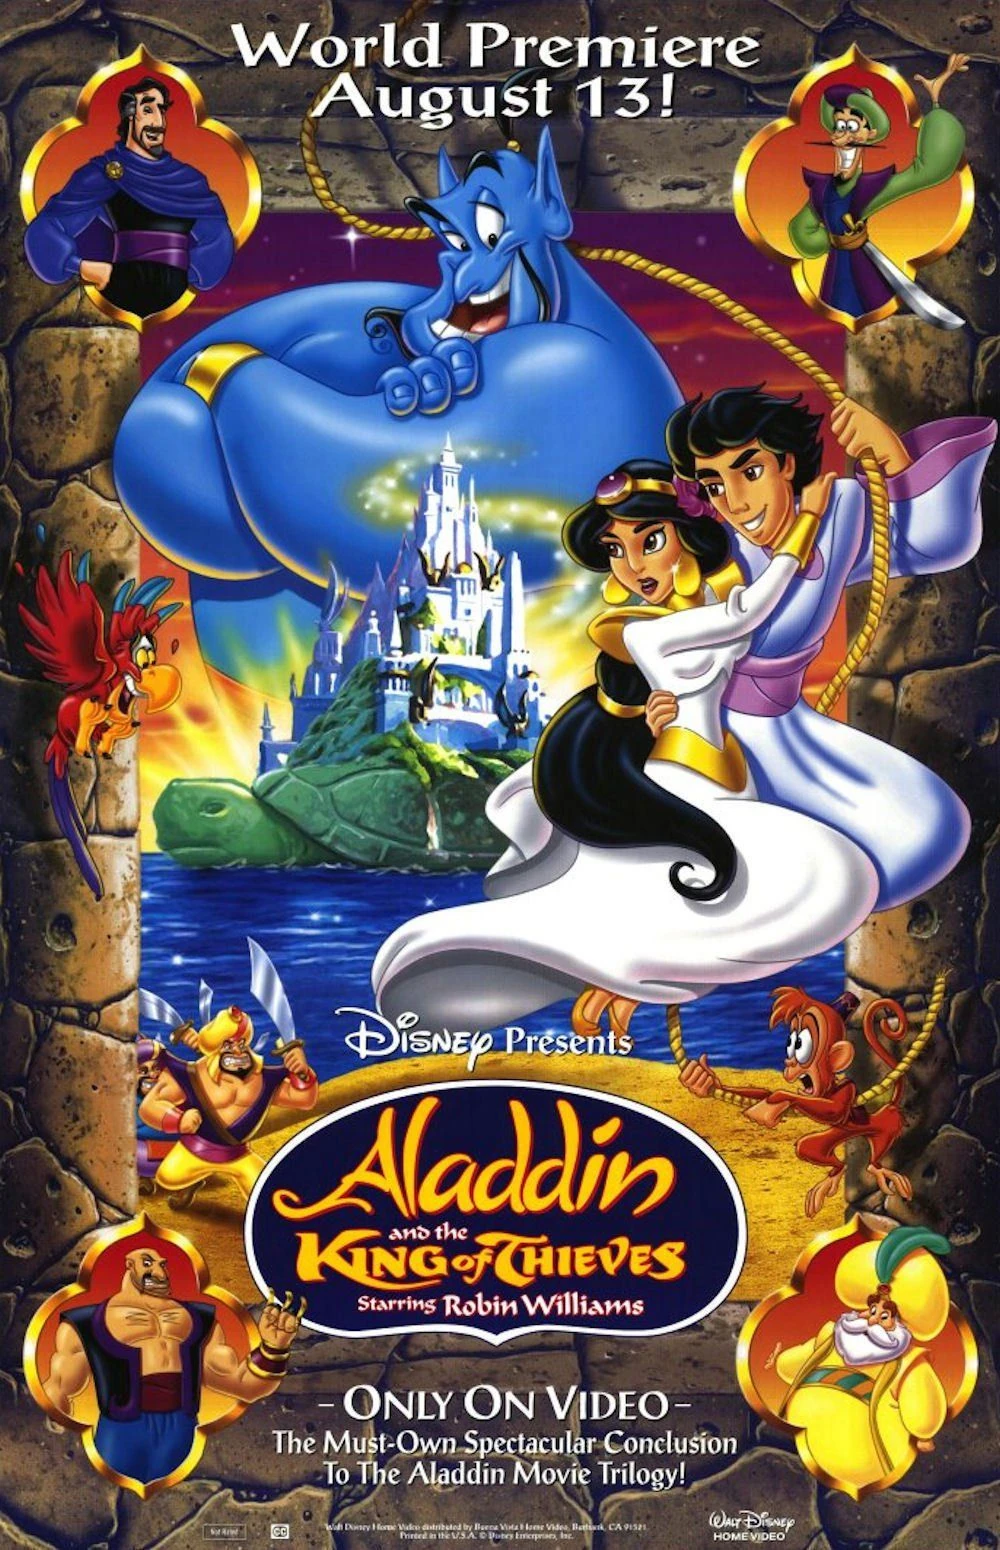 FULL MOVIE: Aladdin and the King of Thieves (1996)